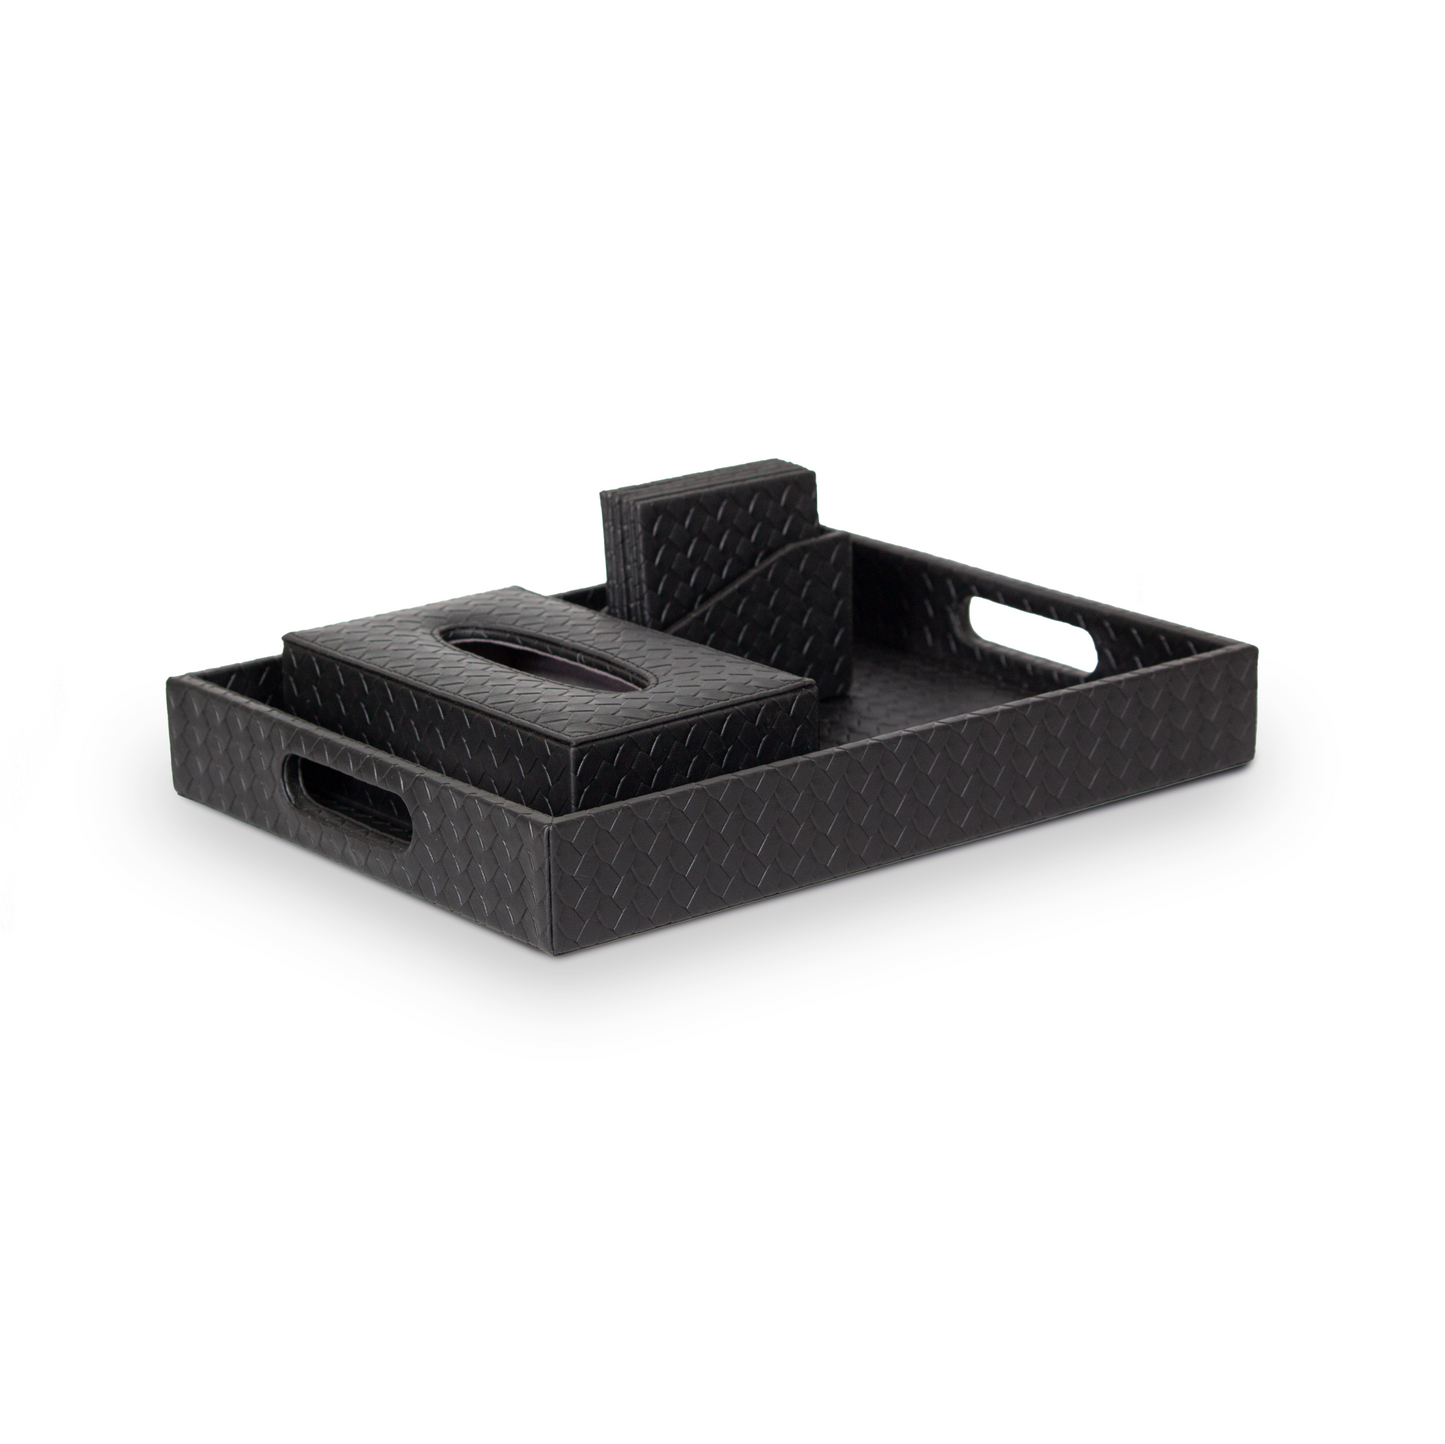 Leather Tray Set With Tissue Box & Coasters Combo (Black)